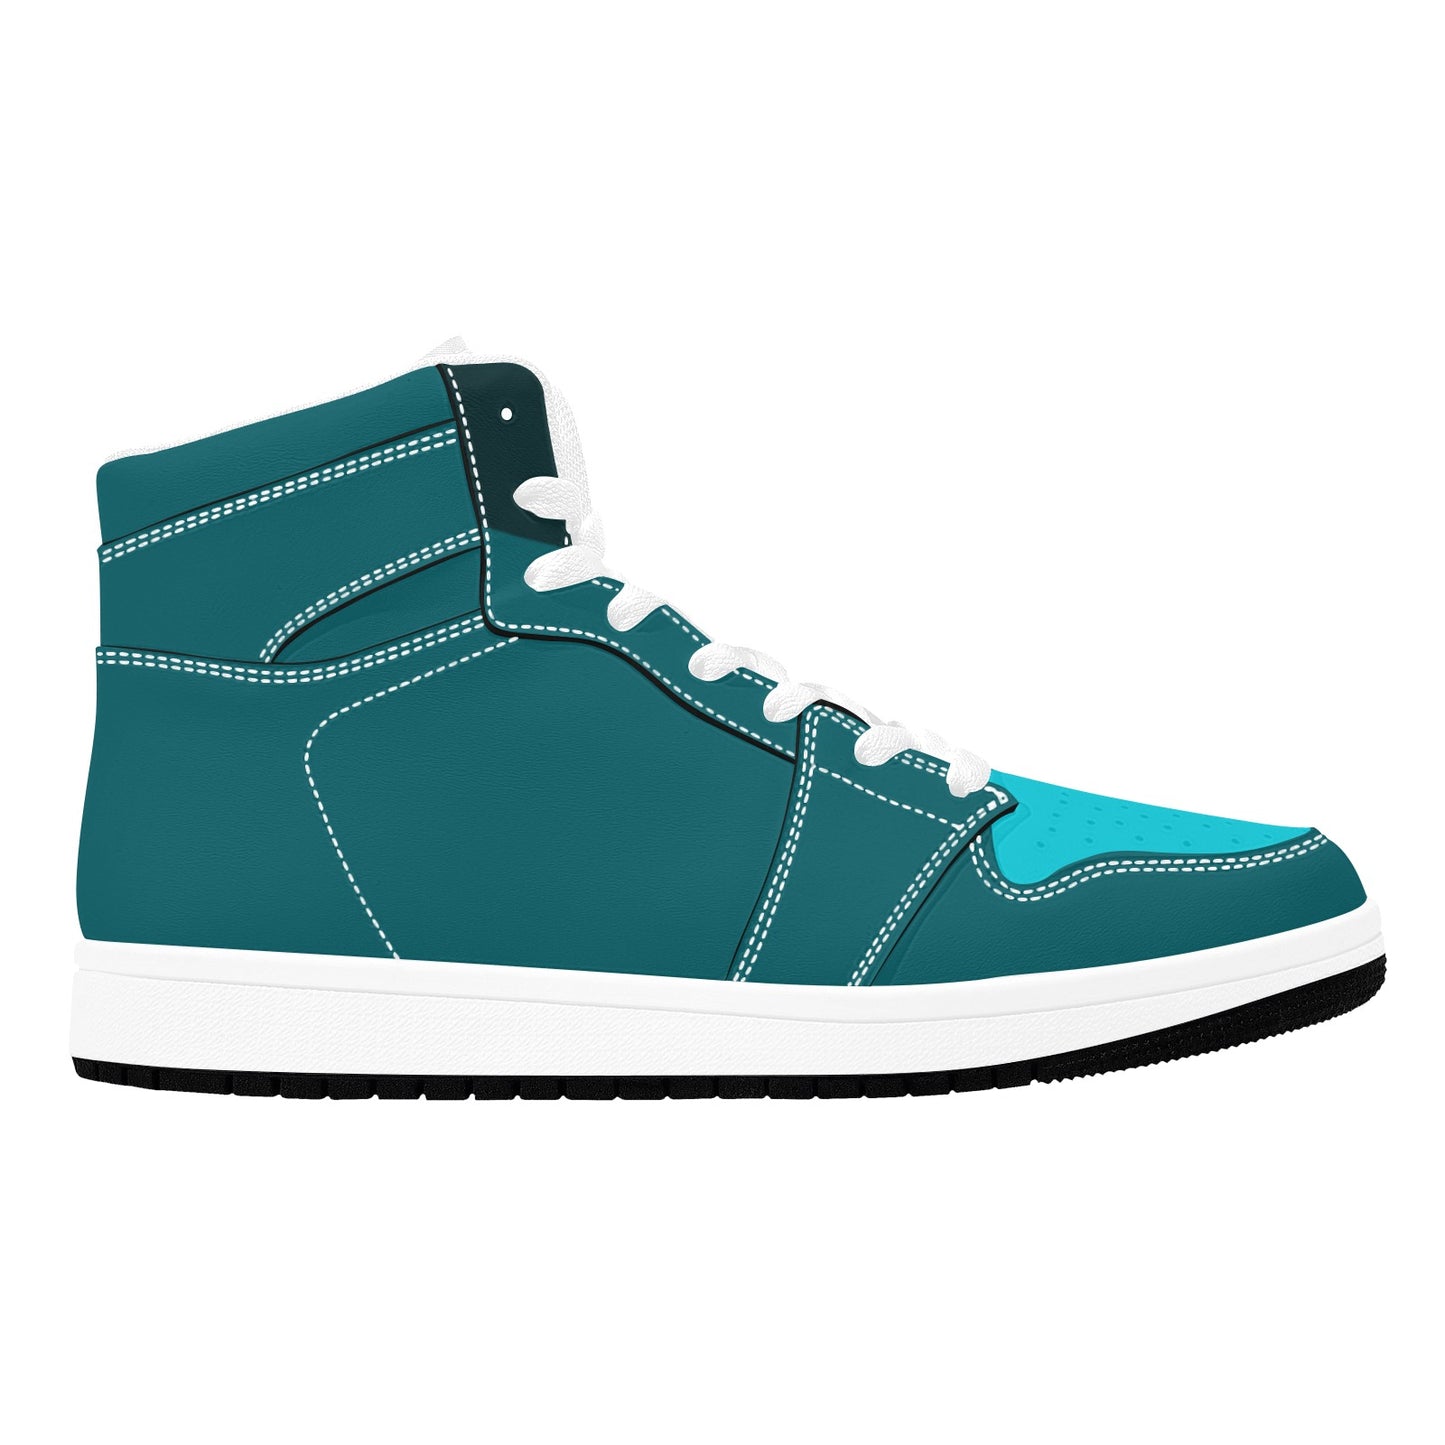 Blue High Top Sneakers Blue Turquoise High Top Sneakers Men's High Top Sneakers